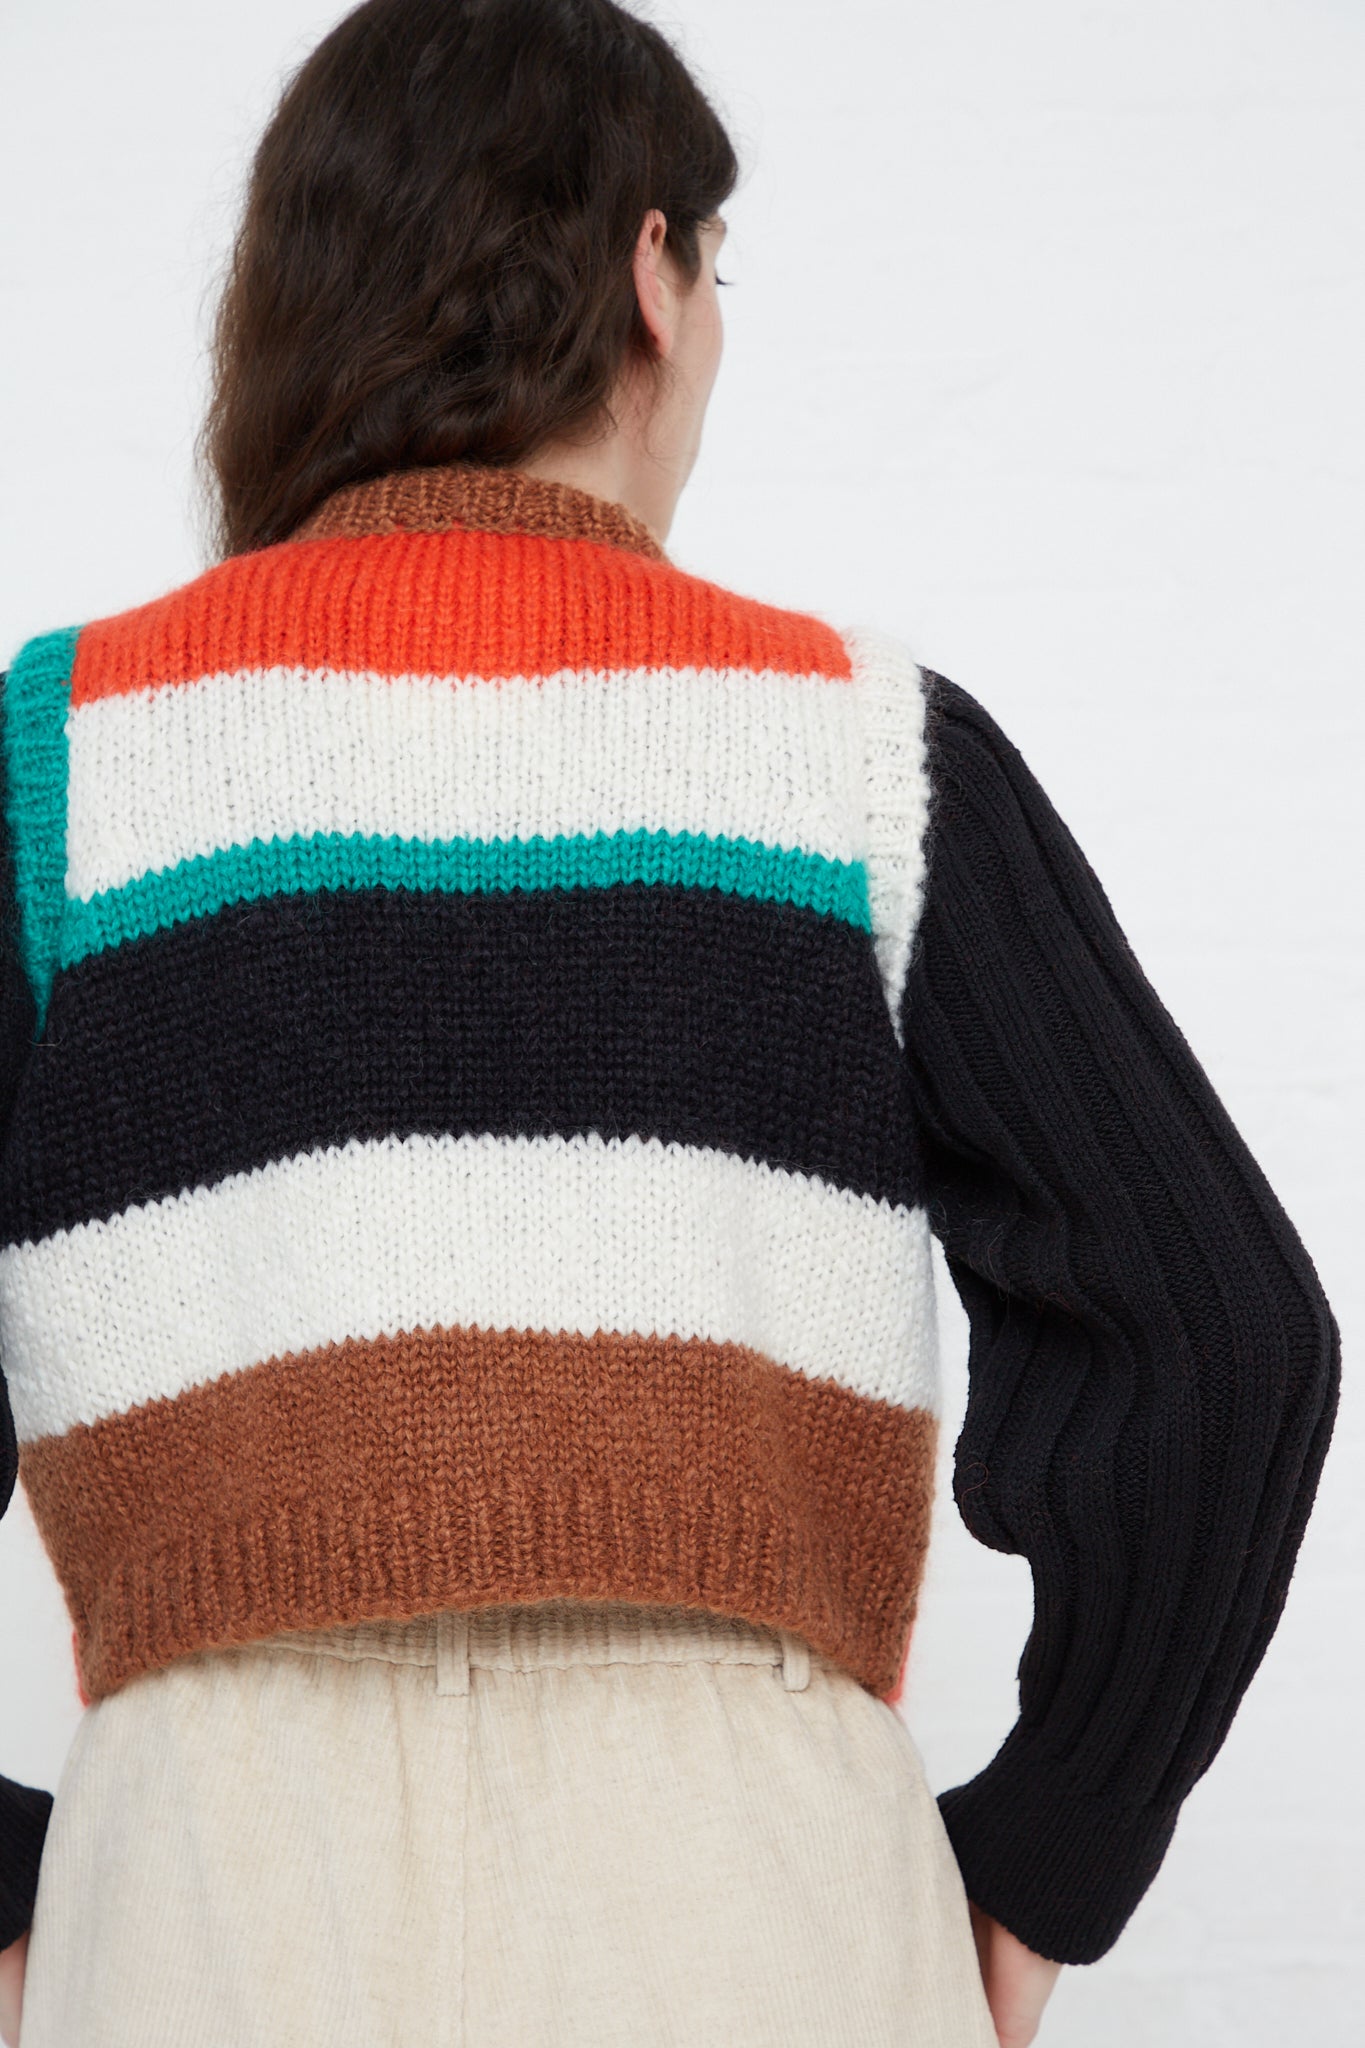 The back view of a woman wearing a Cordera Striped Mohair Waistcoat.